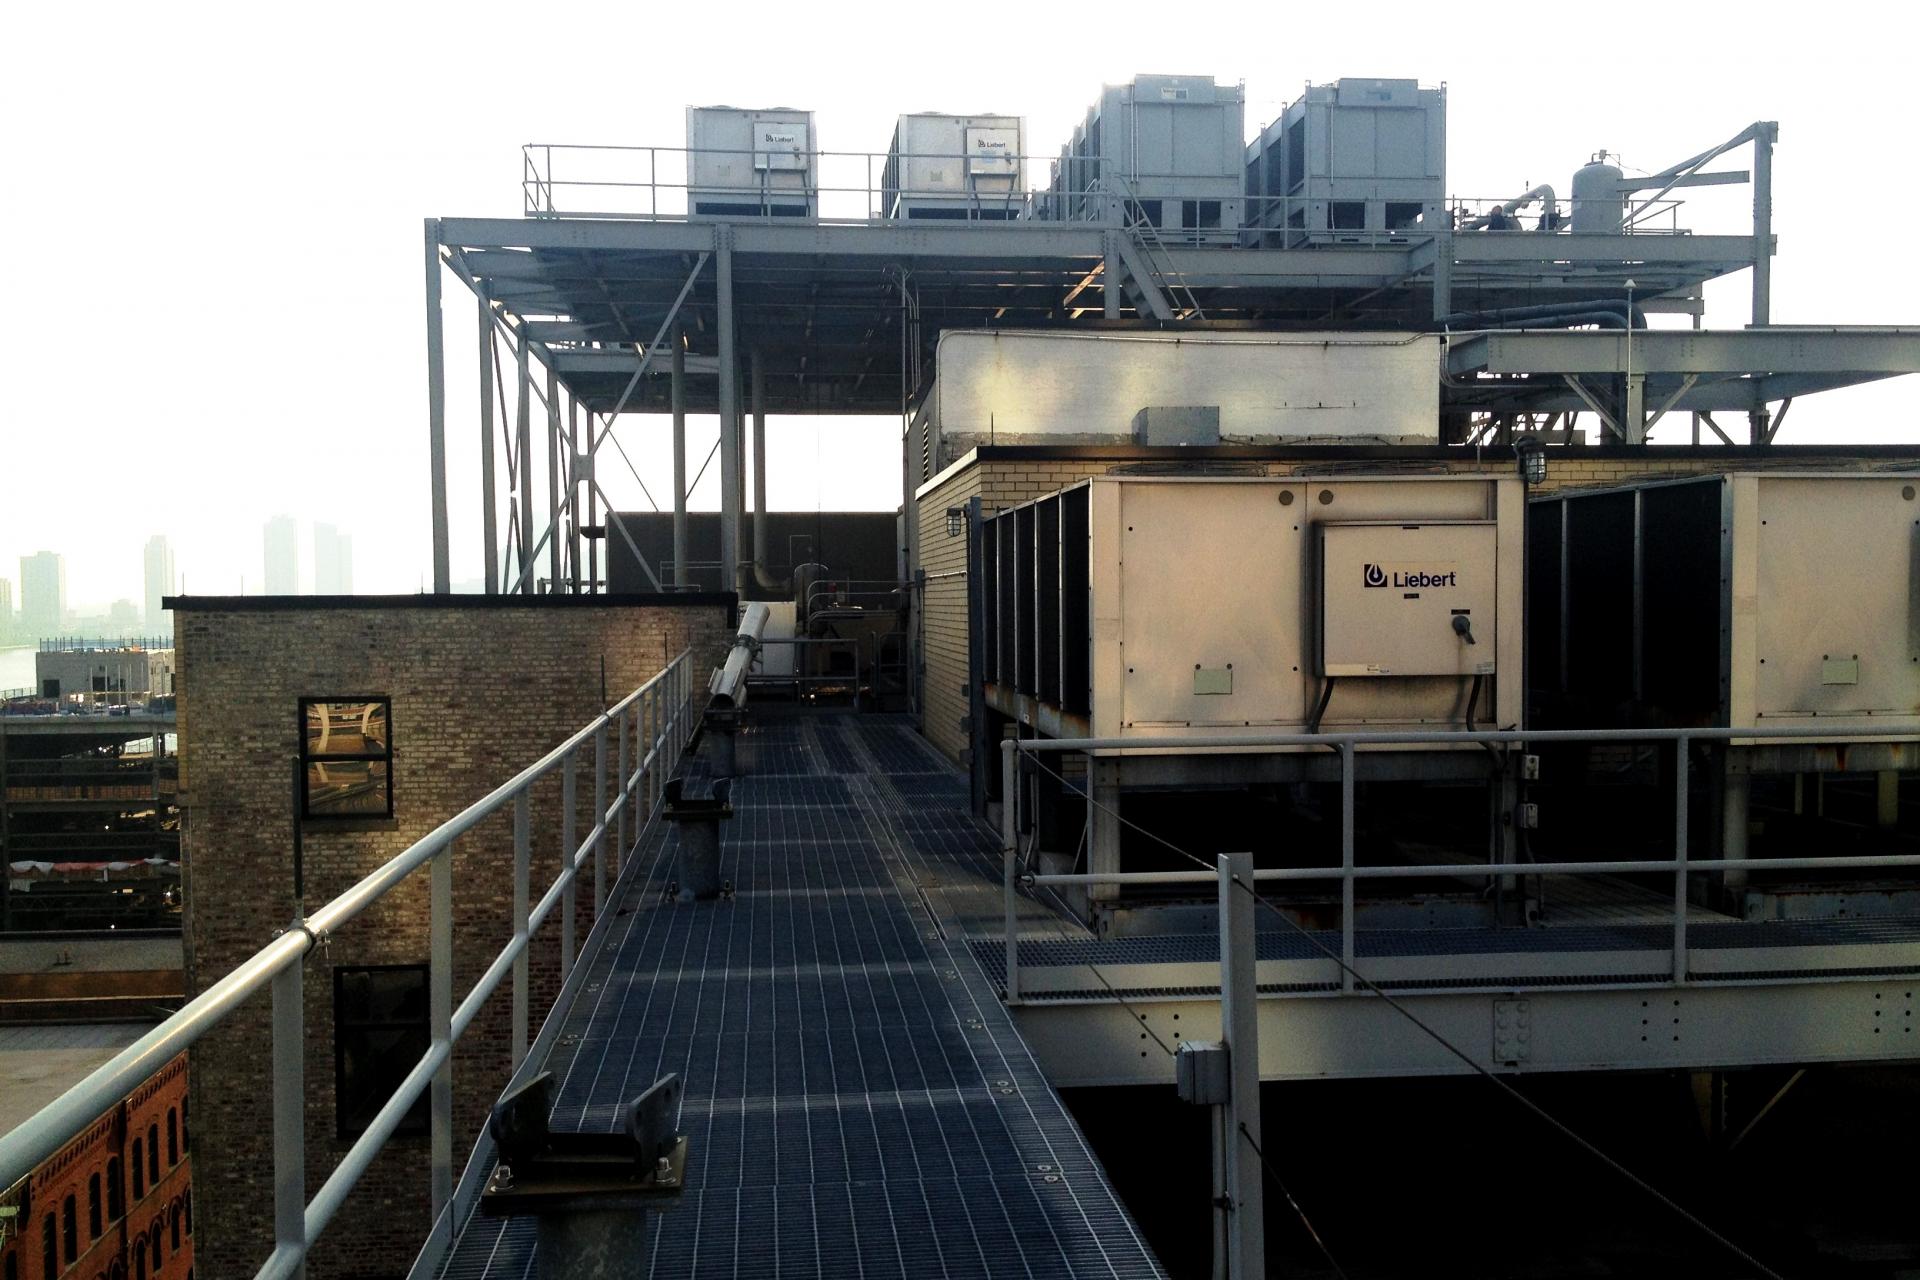 The concurrently maintainable cooling plant consists of dry coolers and air-cooled chillers located on roof dunnage and a dunnage penthouse. The generators are located rooftop as well. 